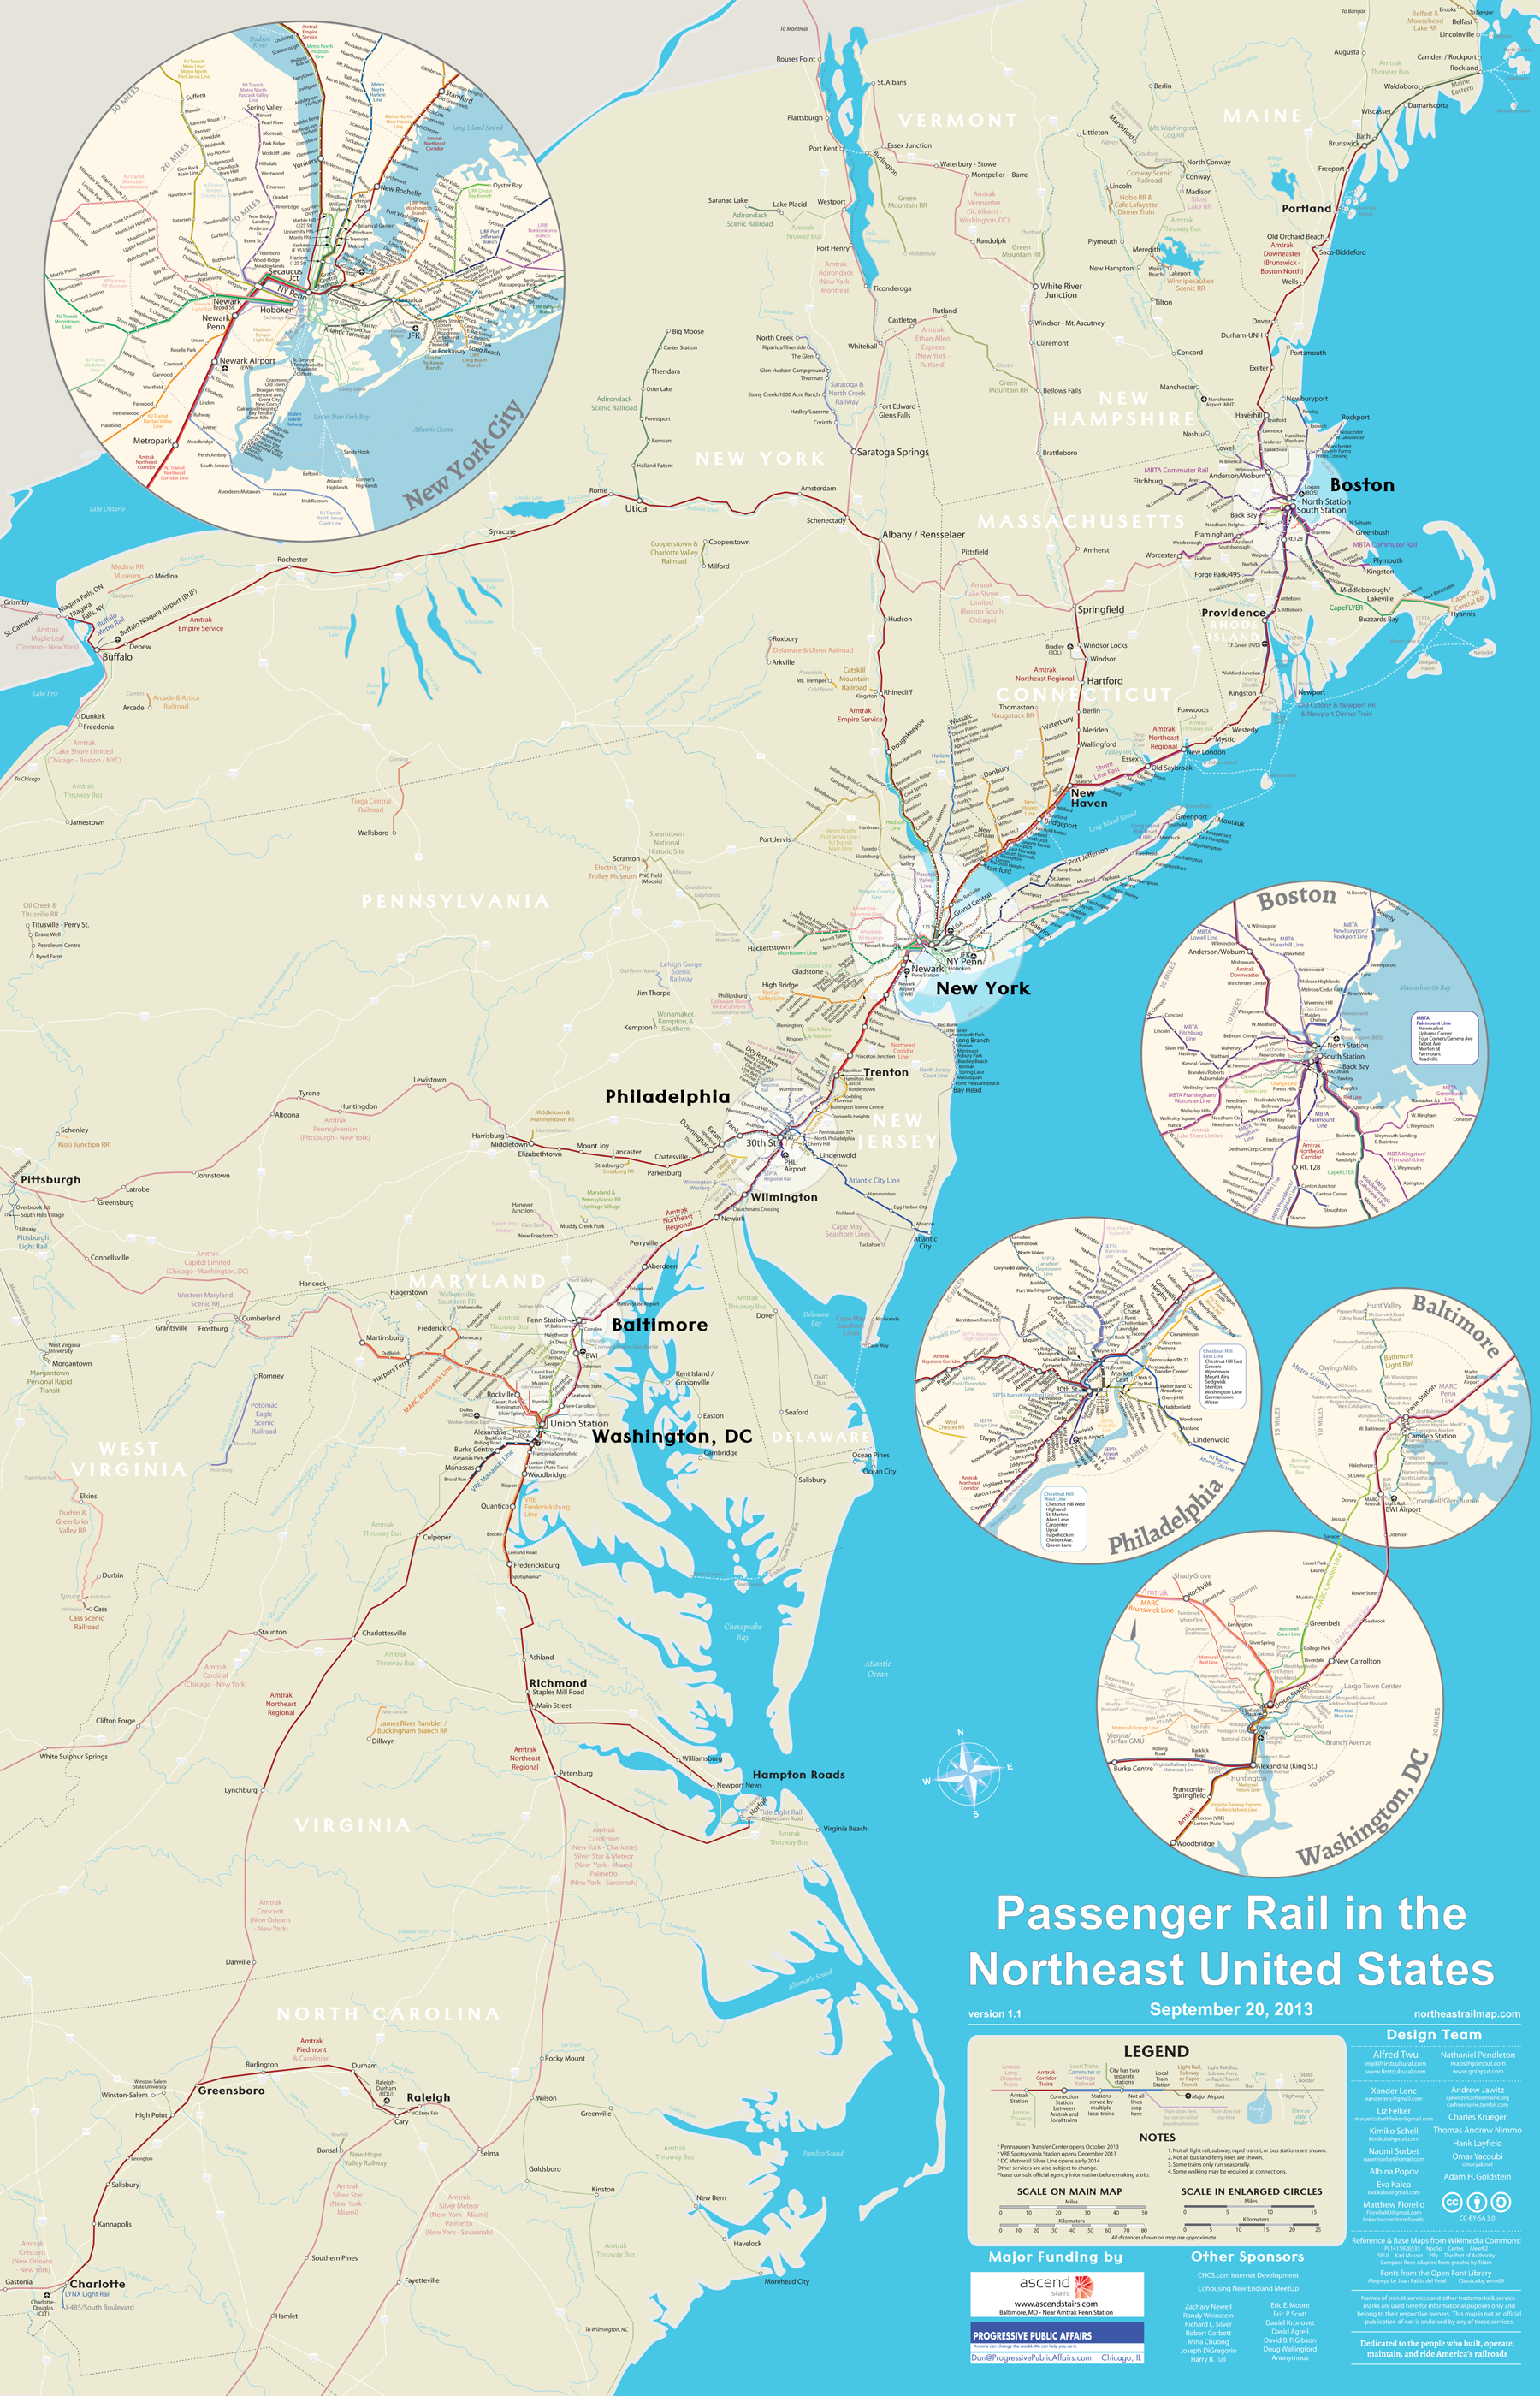 North East Map Of Us All northeast US passenger rail on one awesome map – Greater 